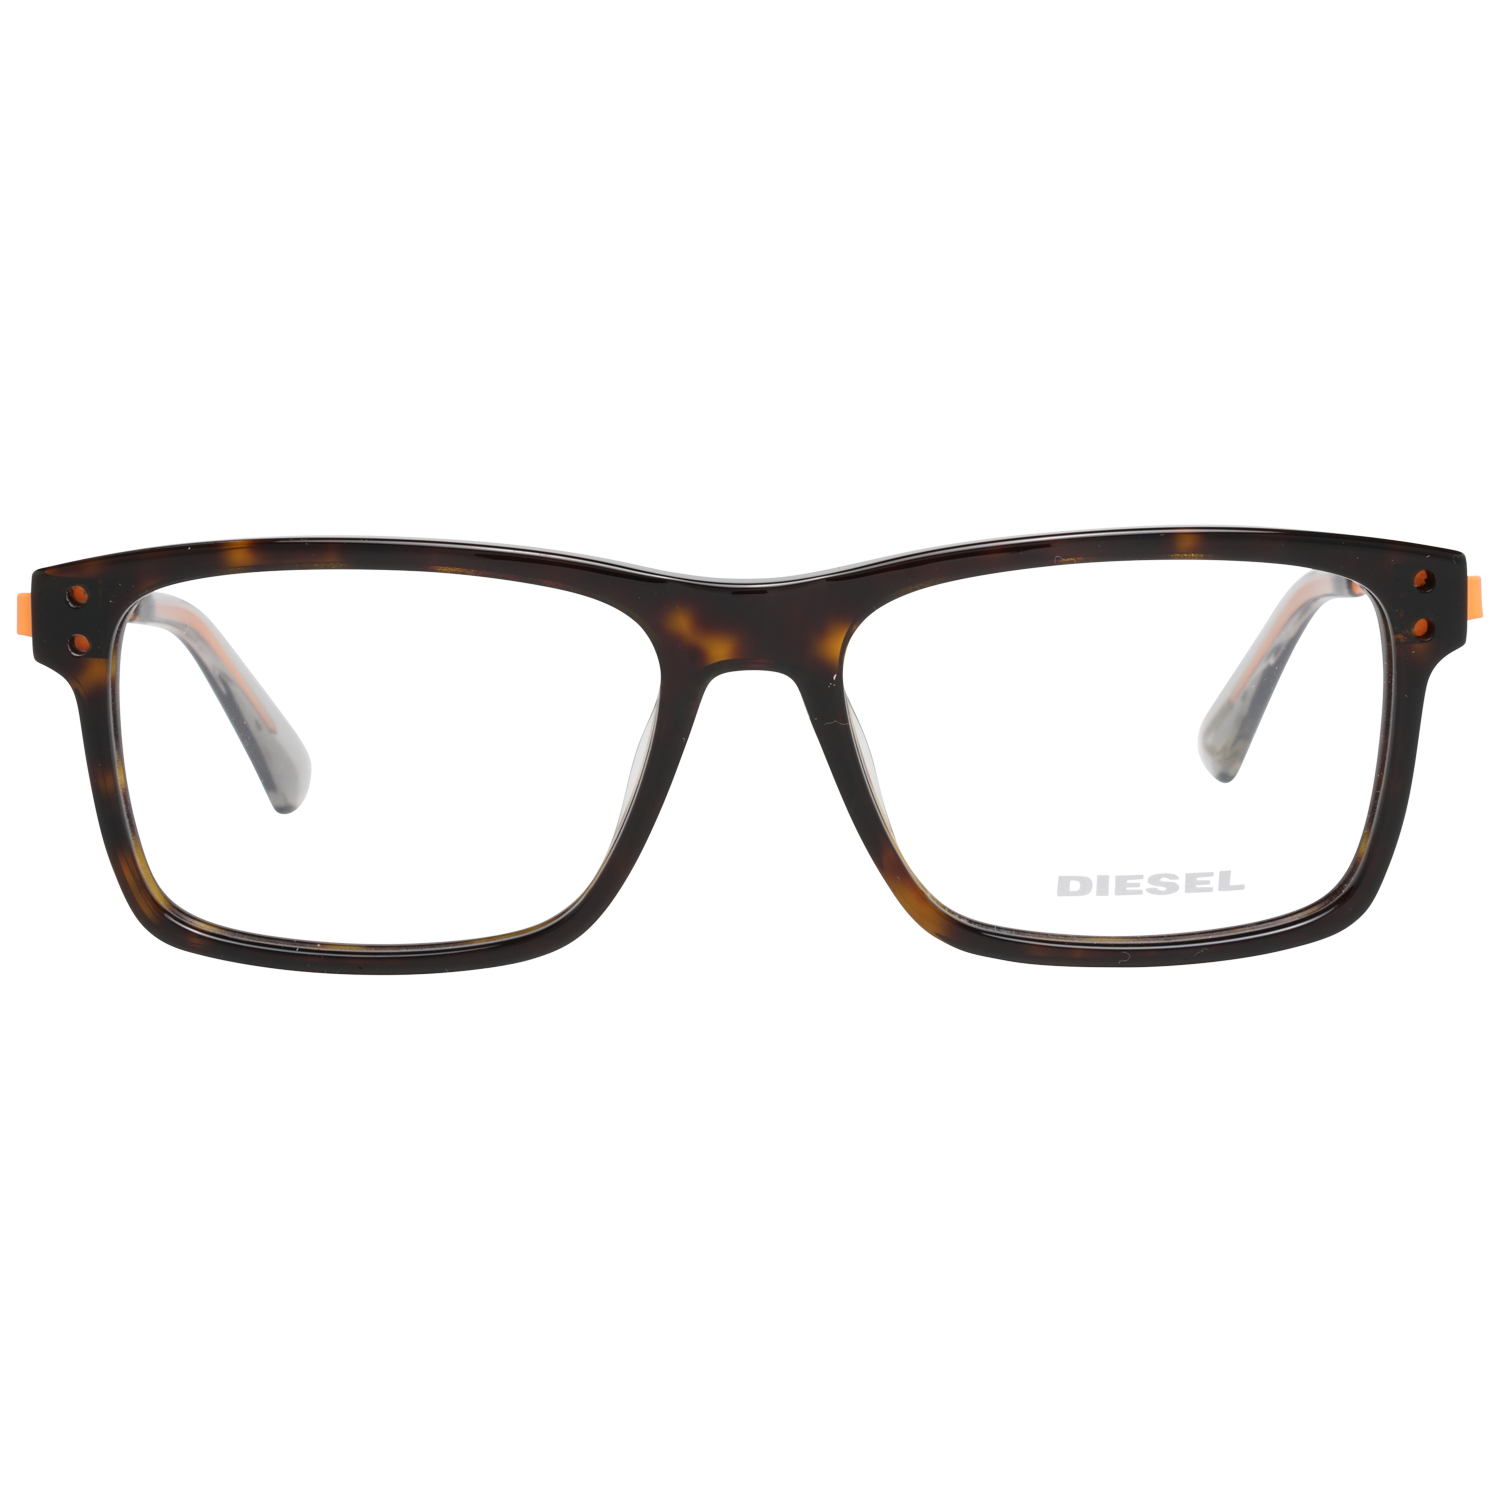 GenderMenMain colorBrownFrame colorBrownFrame materialMetal & PlasticSize54-16-145Lenses width54mmLenses heigth38mmBridge length16mmFrame width138mmTemple length145mmShipment includesCase, Cleaning clothStyleFull-RimSpring hingeNo